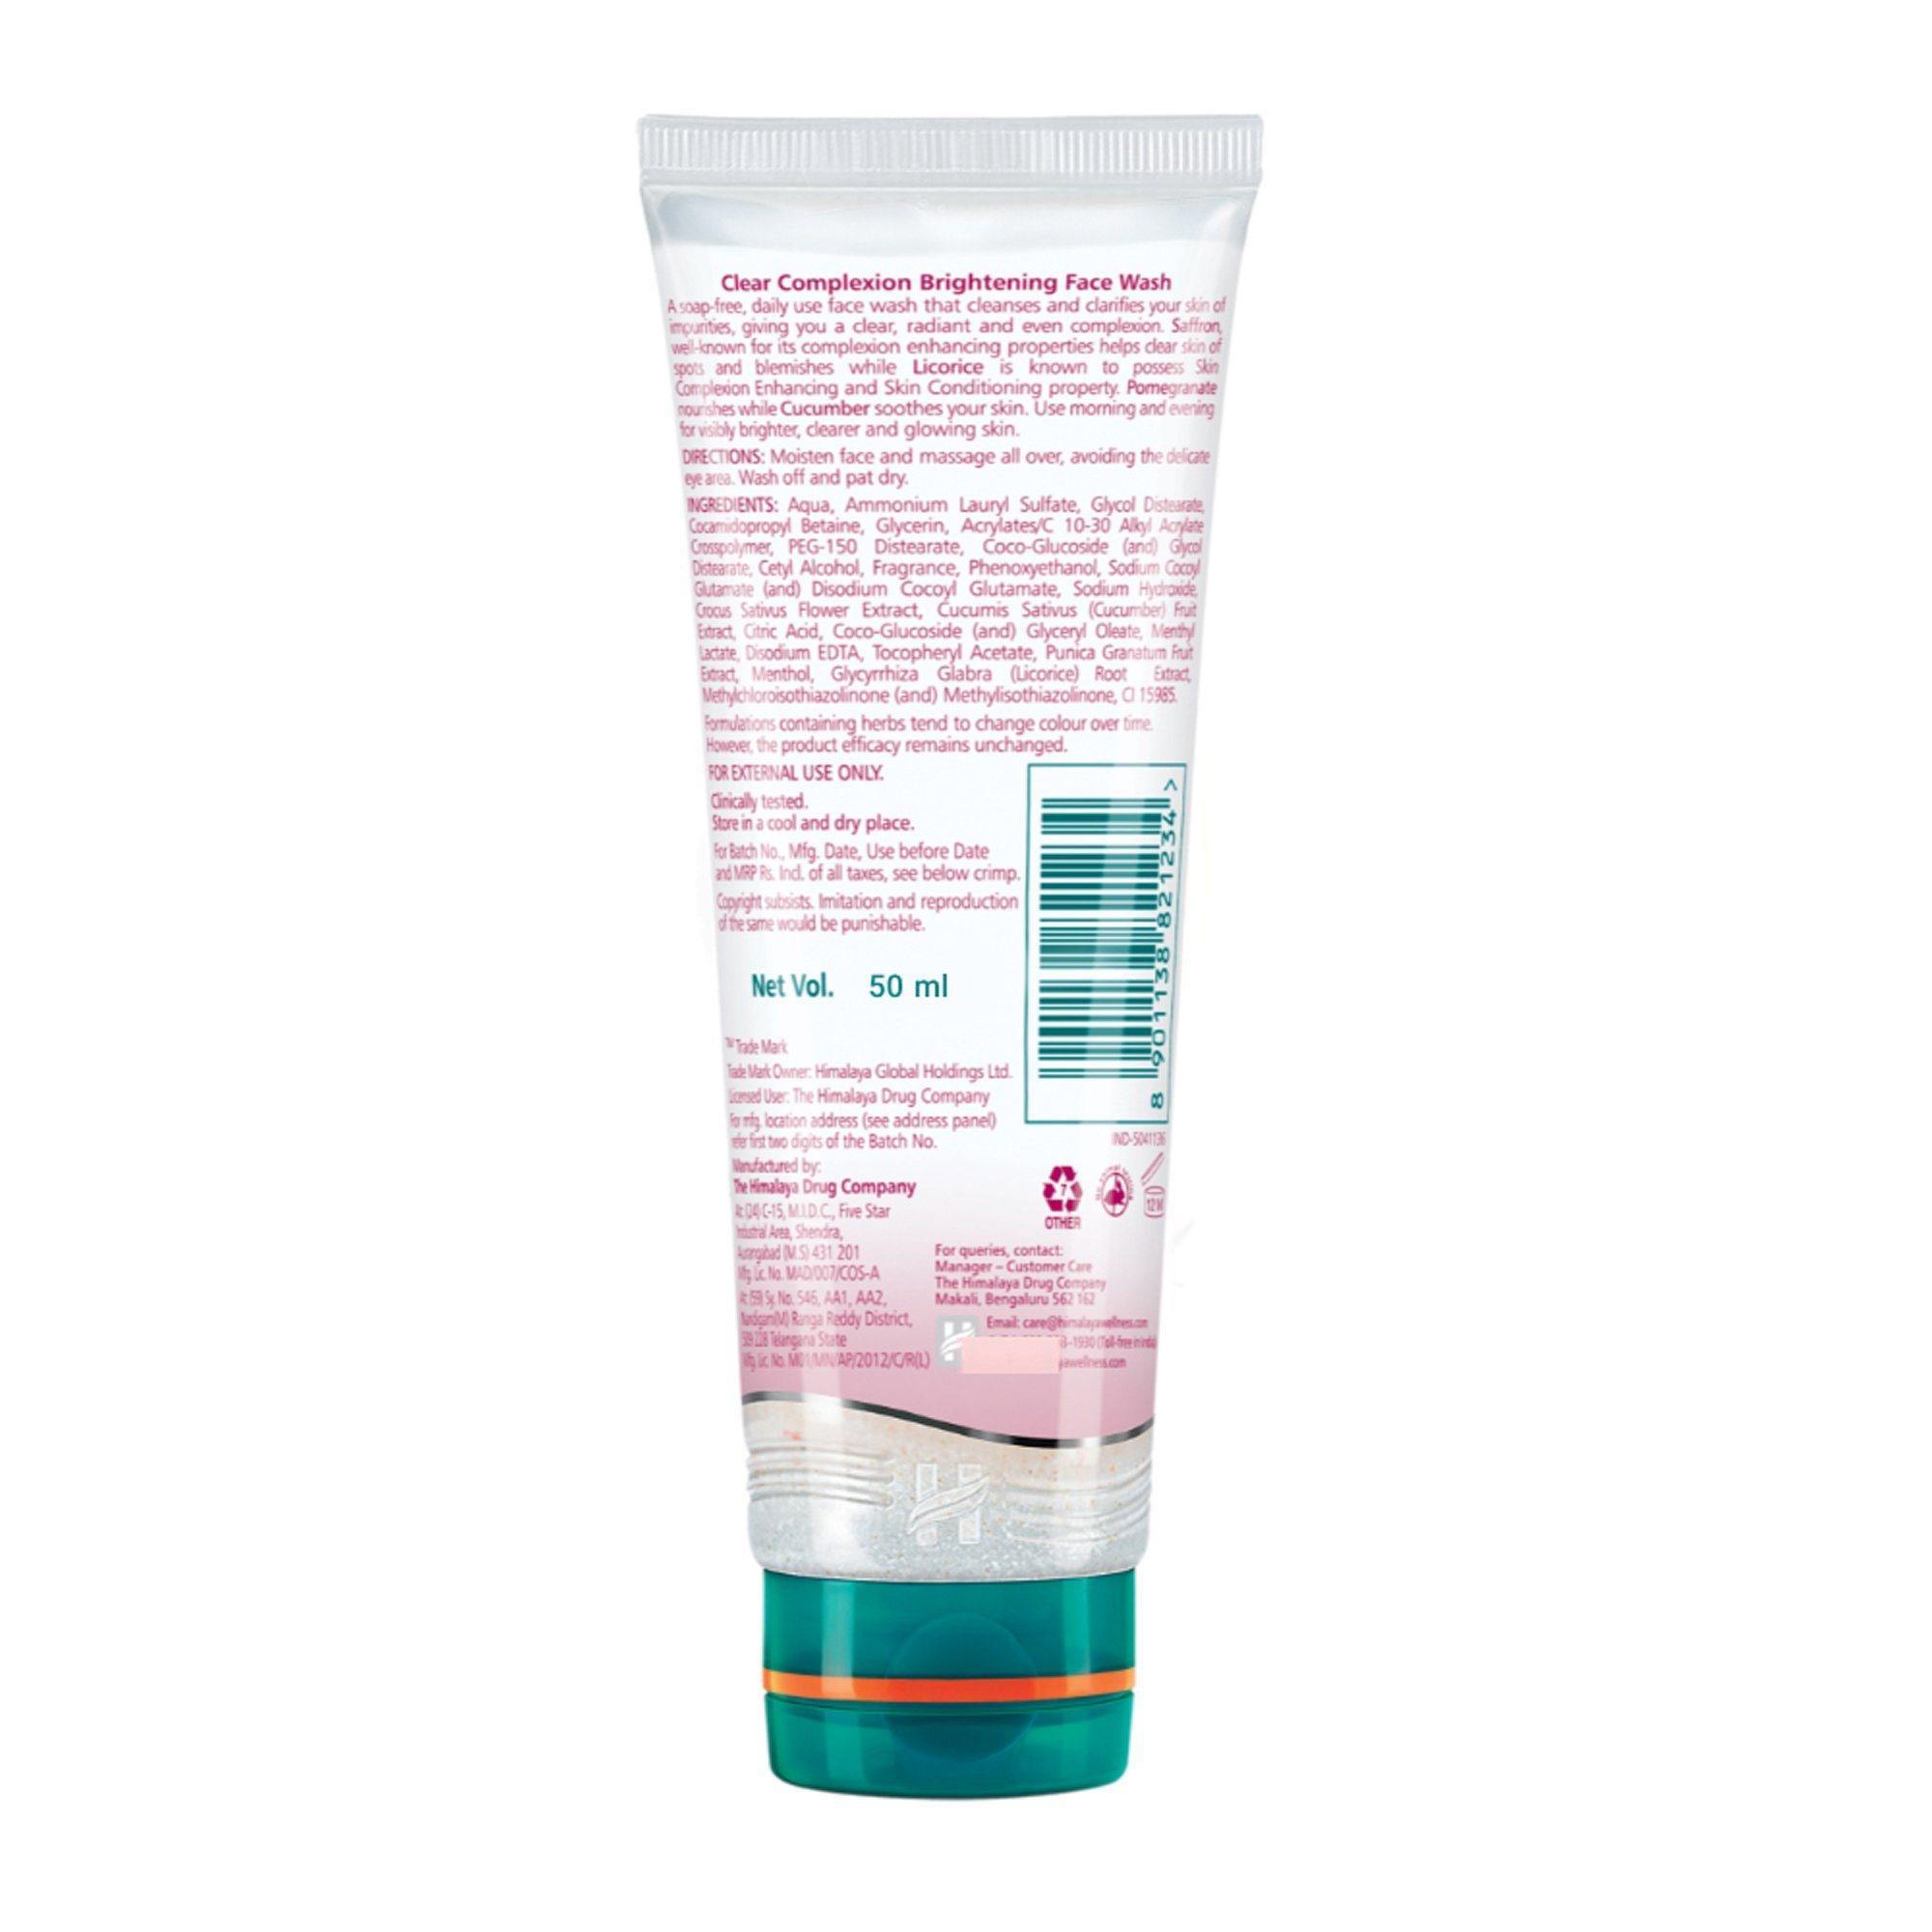 Himalaya Clear Complexion Brightening Face Wash 50ml Ingredients